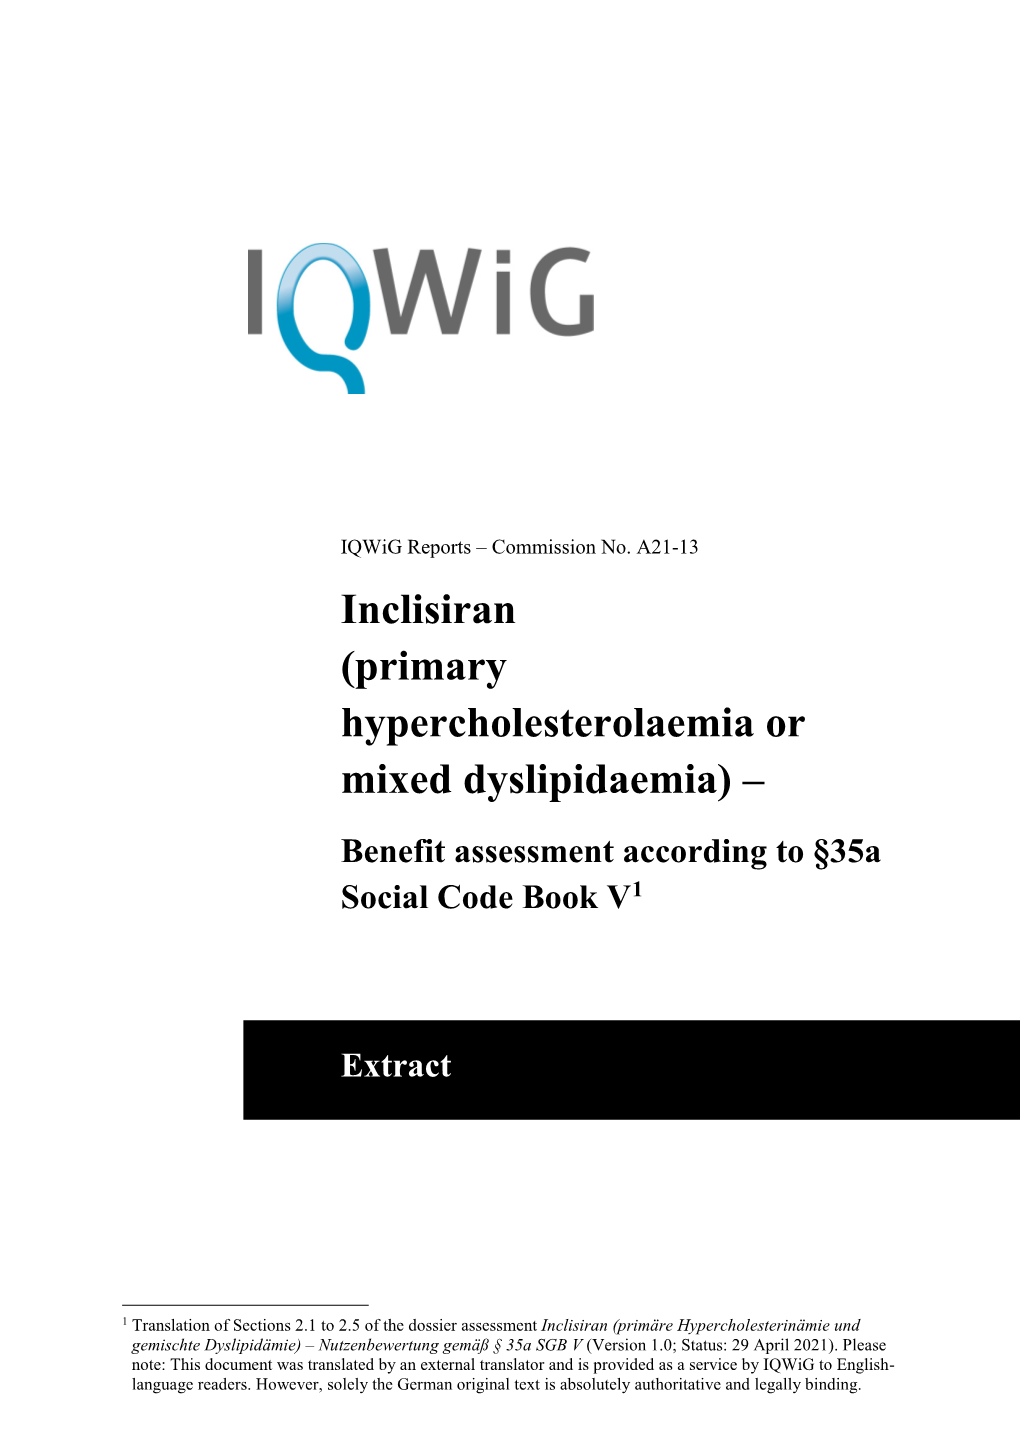 A21-13 Inclisiran (Primary Hypercholesterolaemia Or Mixed Dyslipidaemia) – Benefit Assessment According to §35A Social Code Book V1